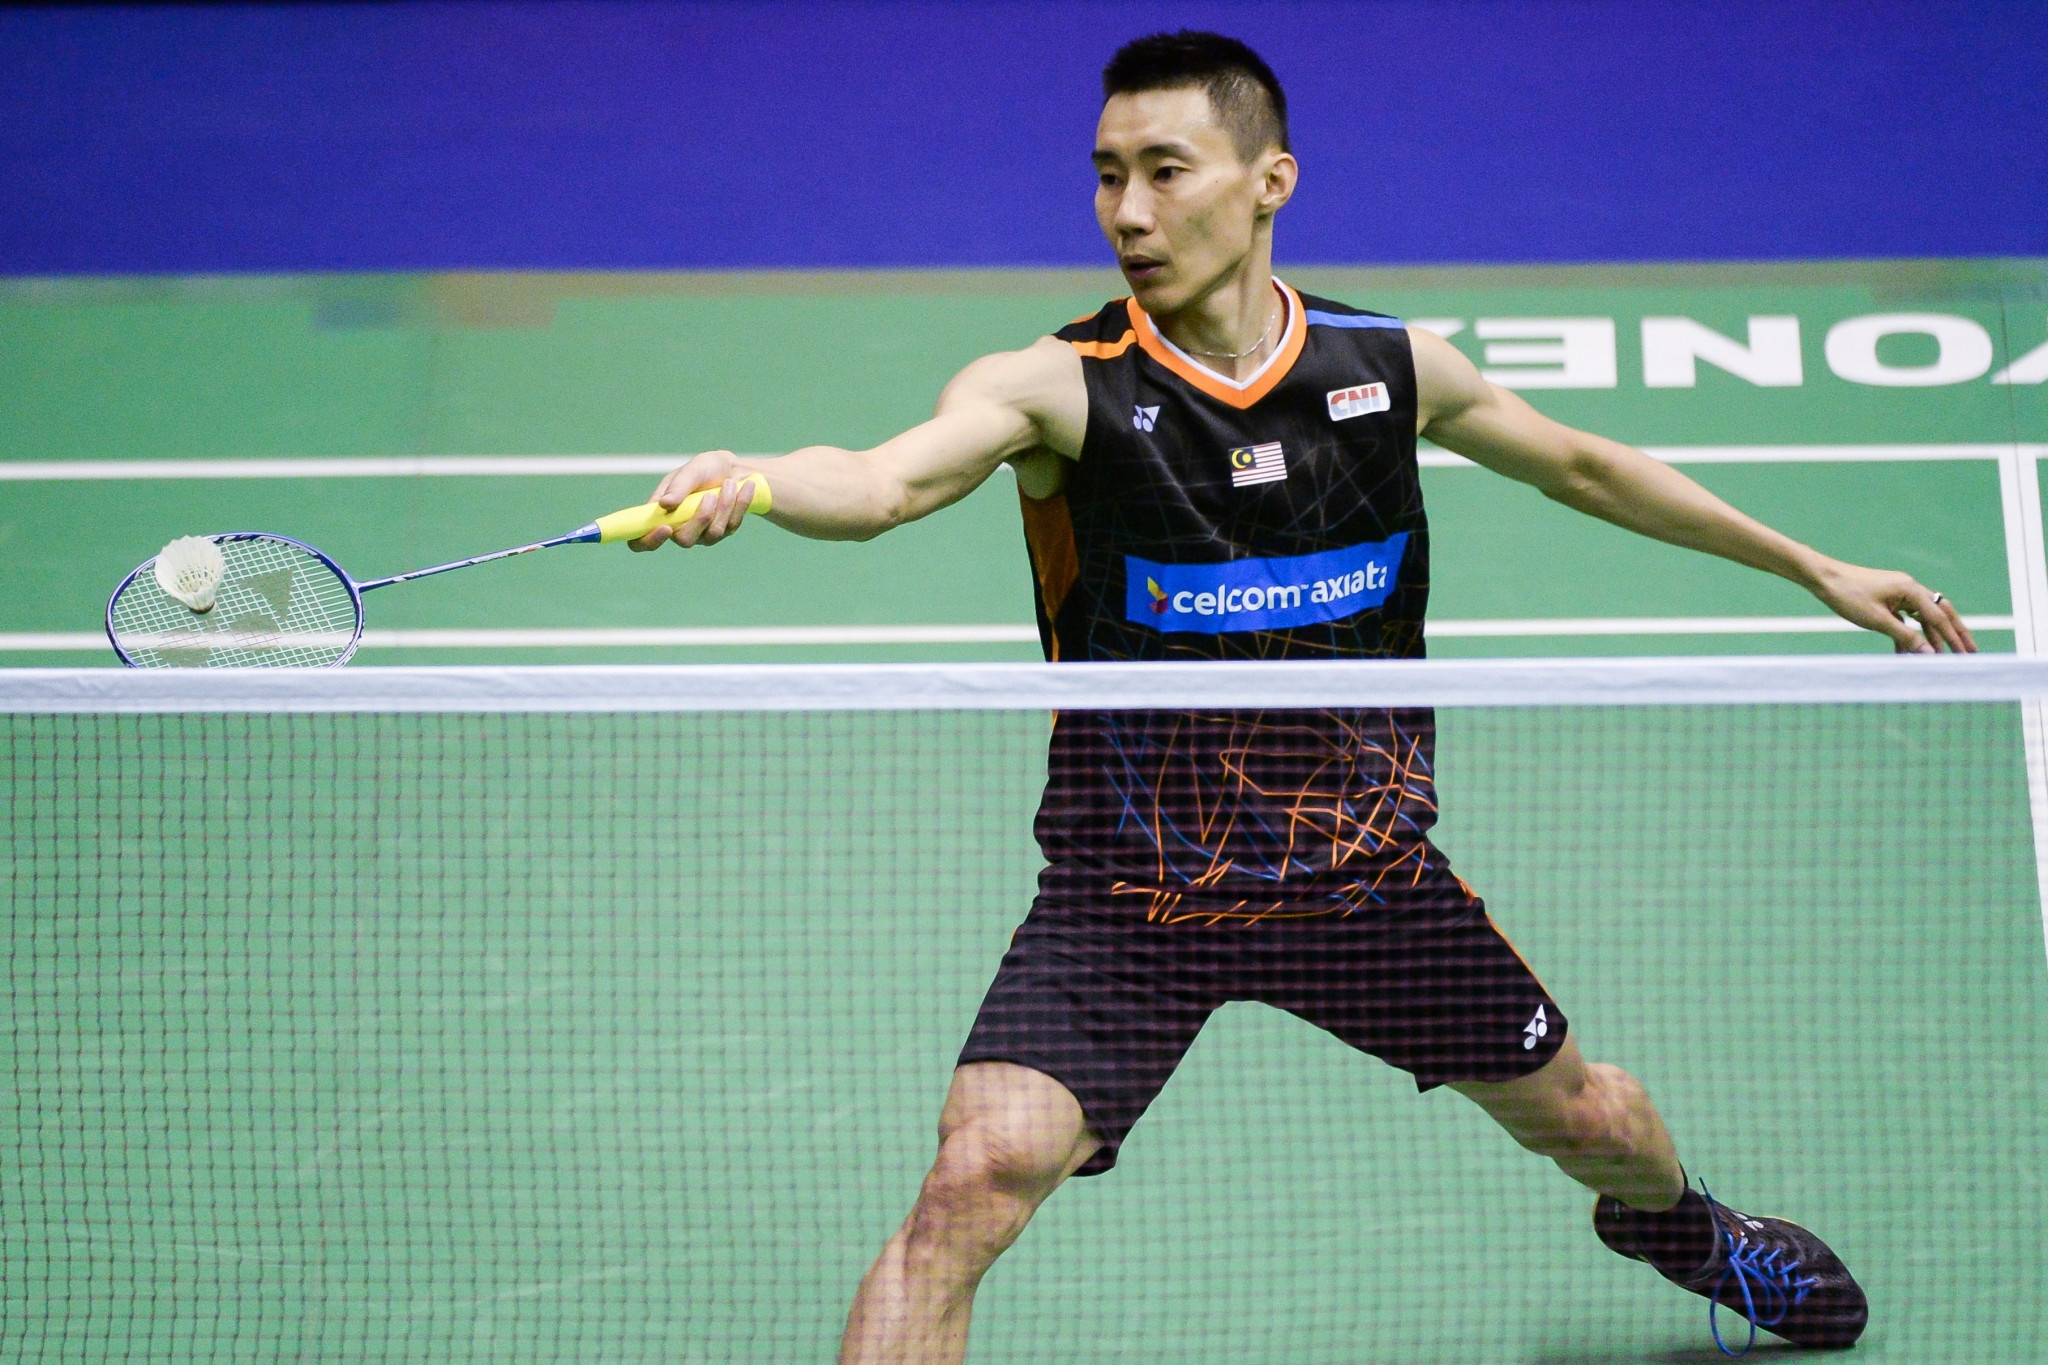 Top seed Lee Chong Wei will hope to avenge his defeat to Chen Long in the Rio 2016 final ©Getty Images